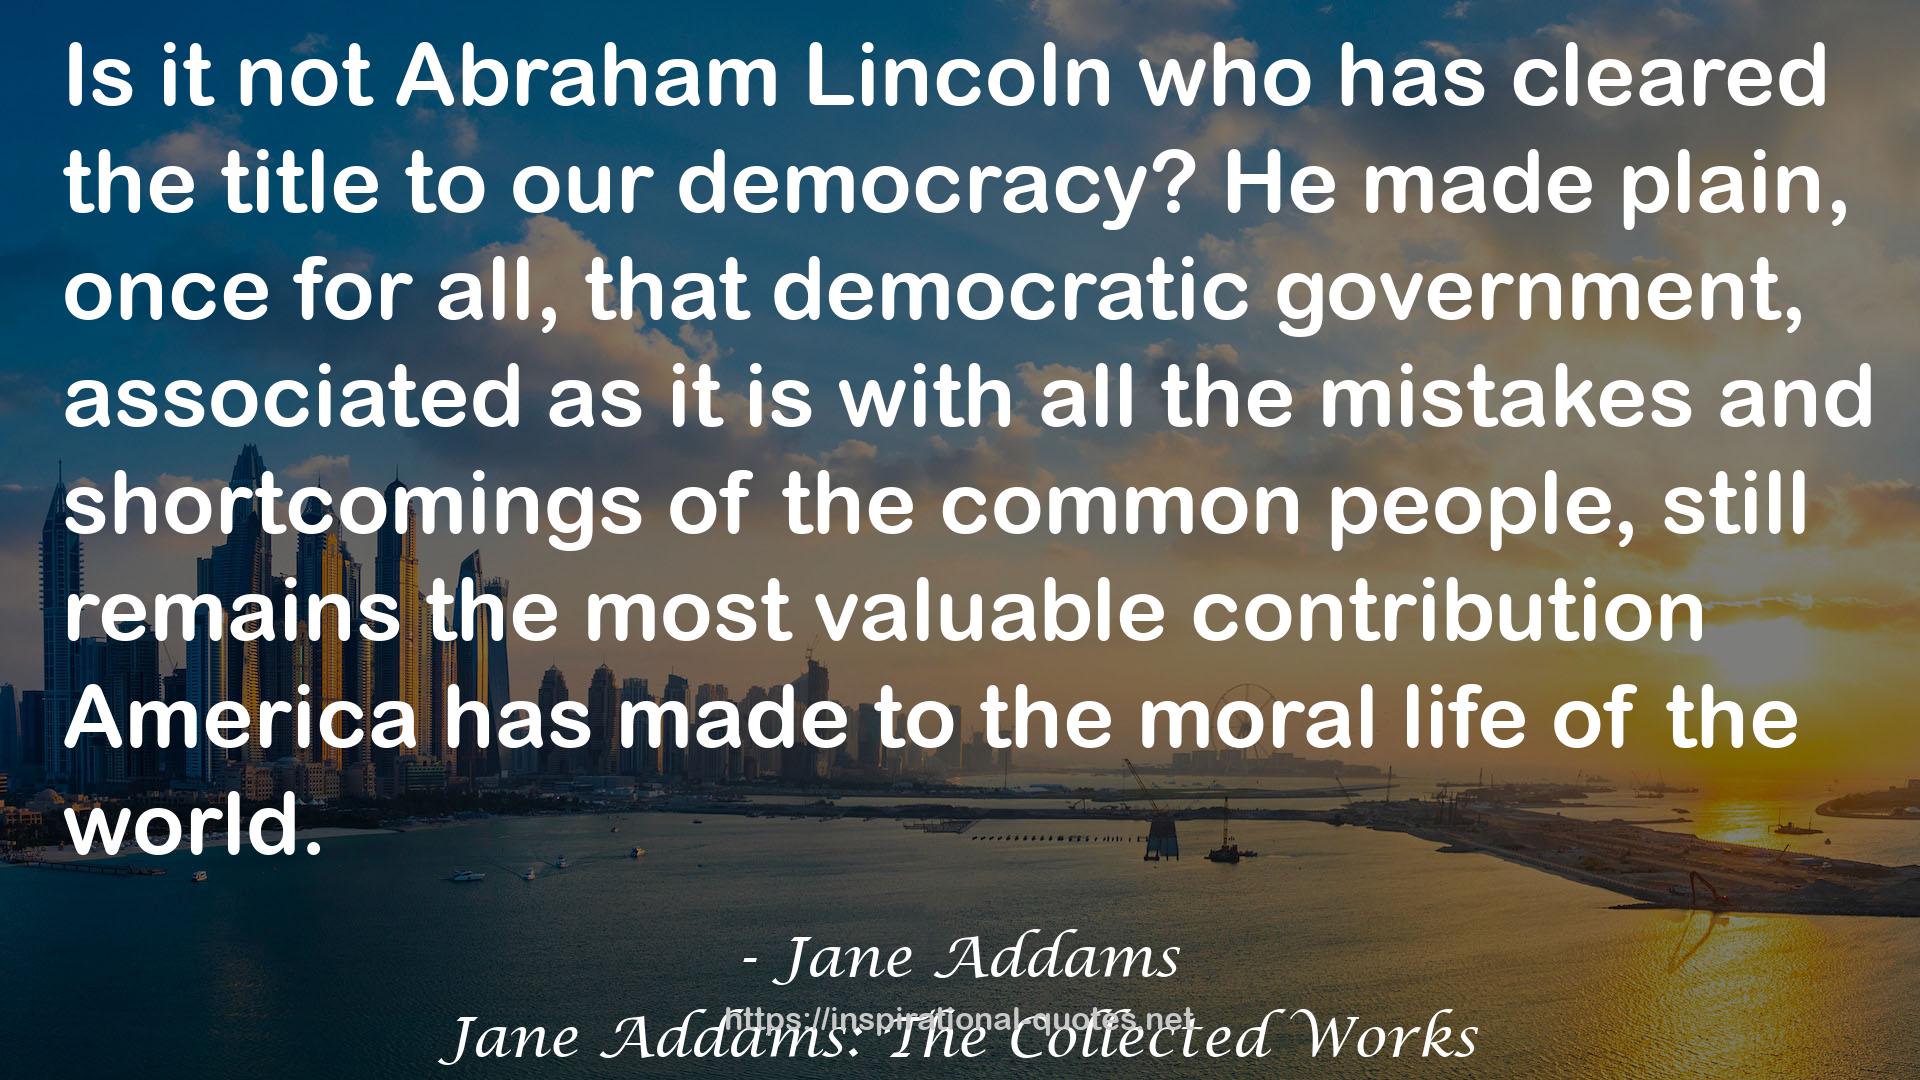 Jane Addams: The Collected Works QUOTES